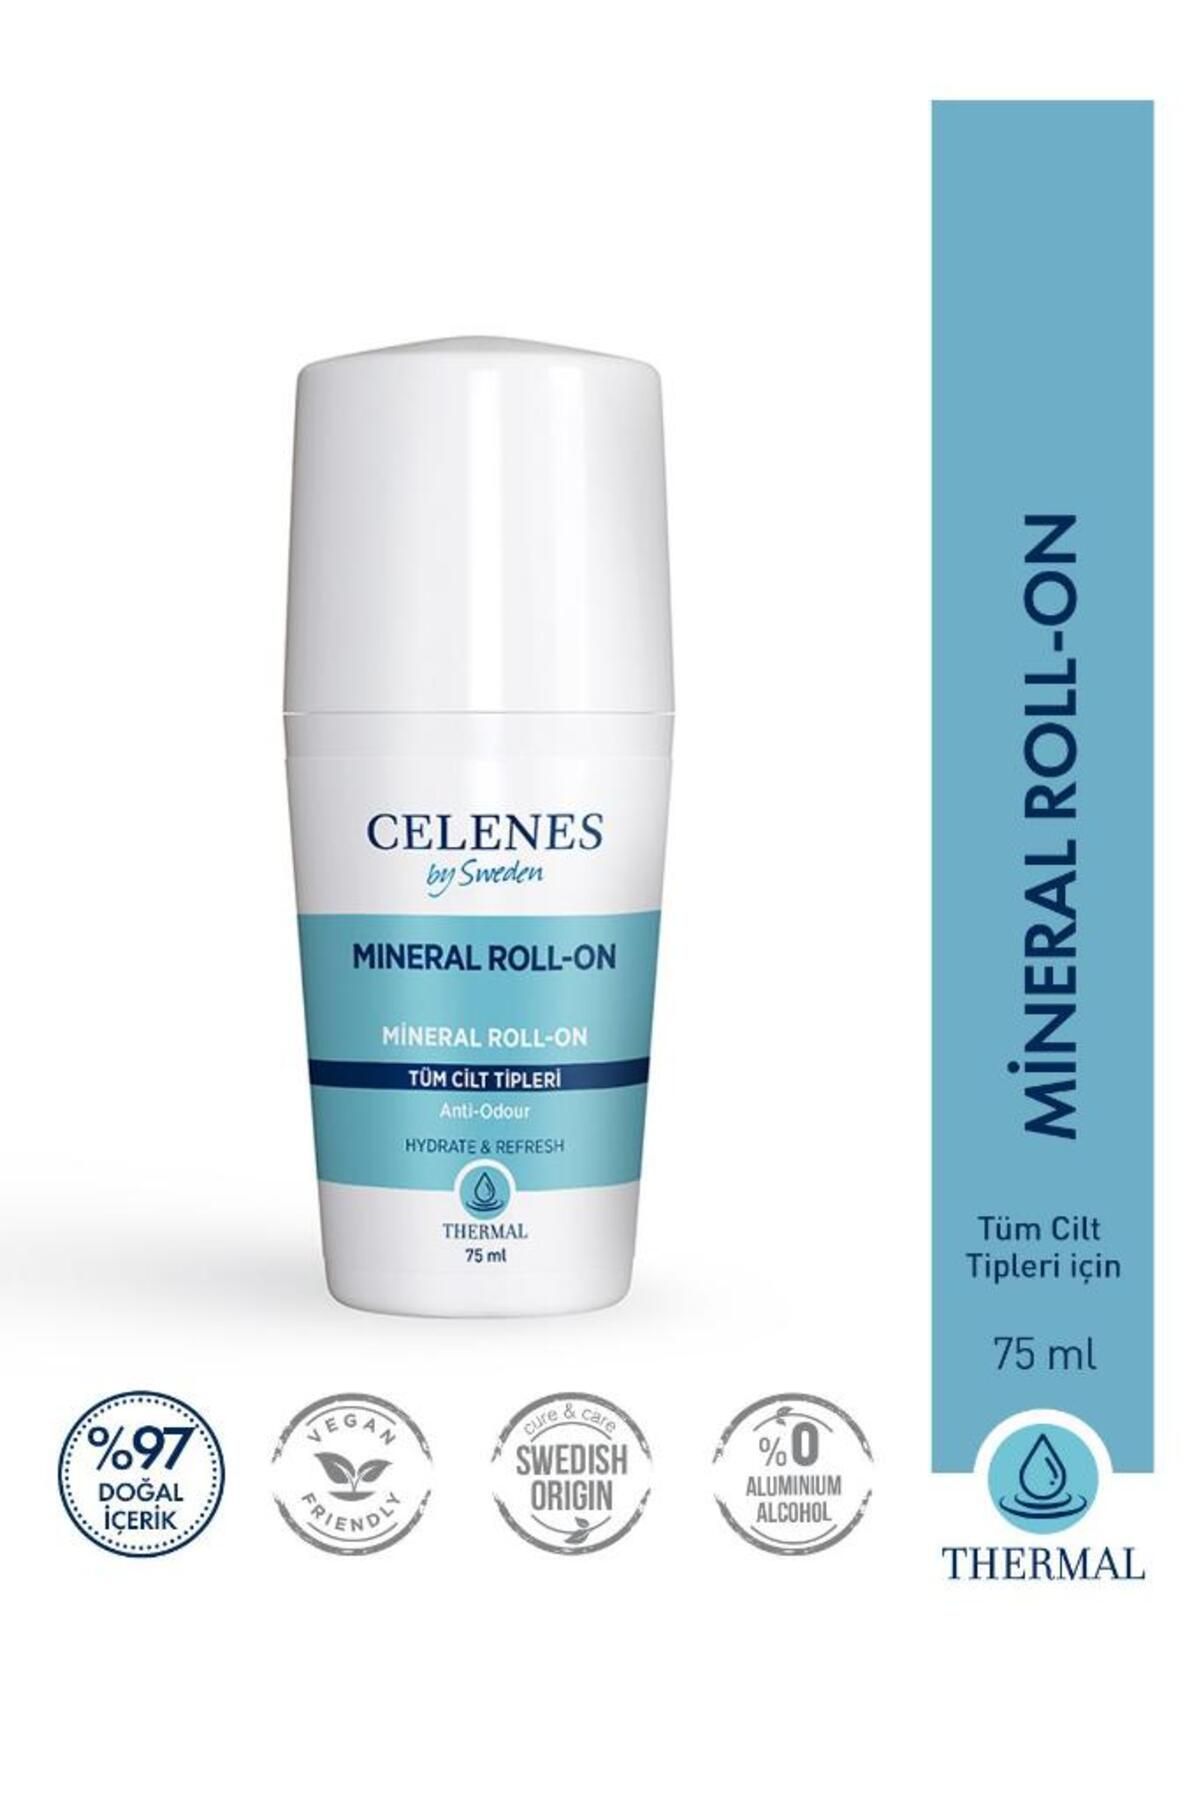 Celenes by Sweden Thermal Roll On 75ml